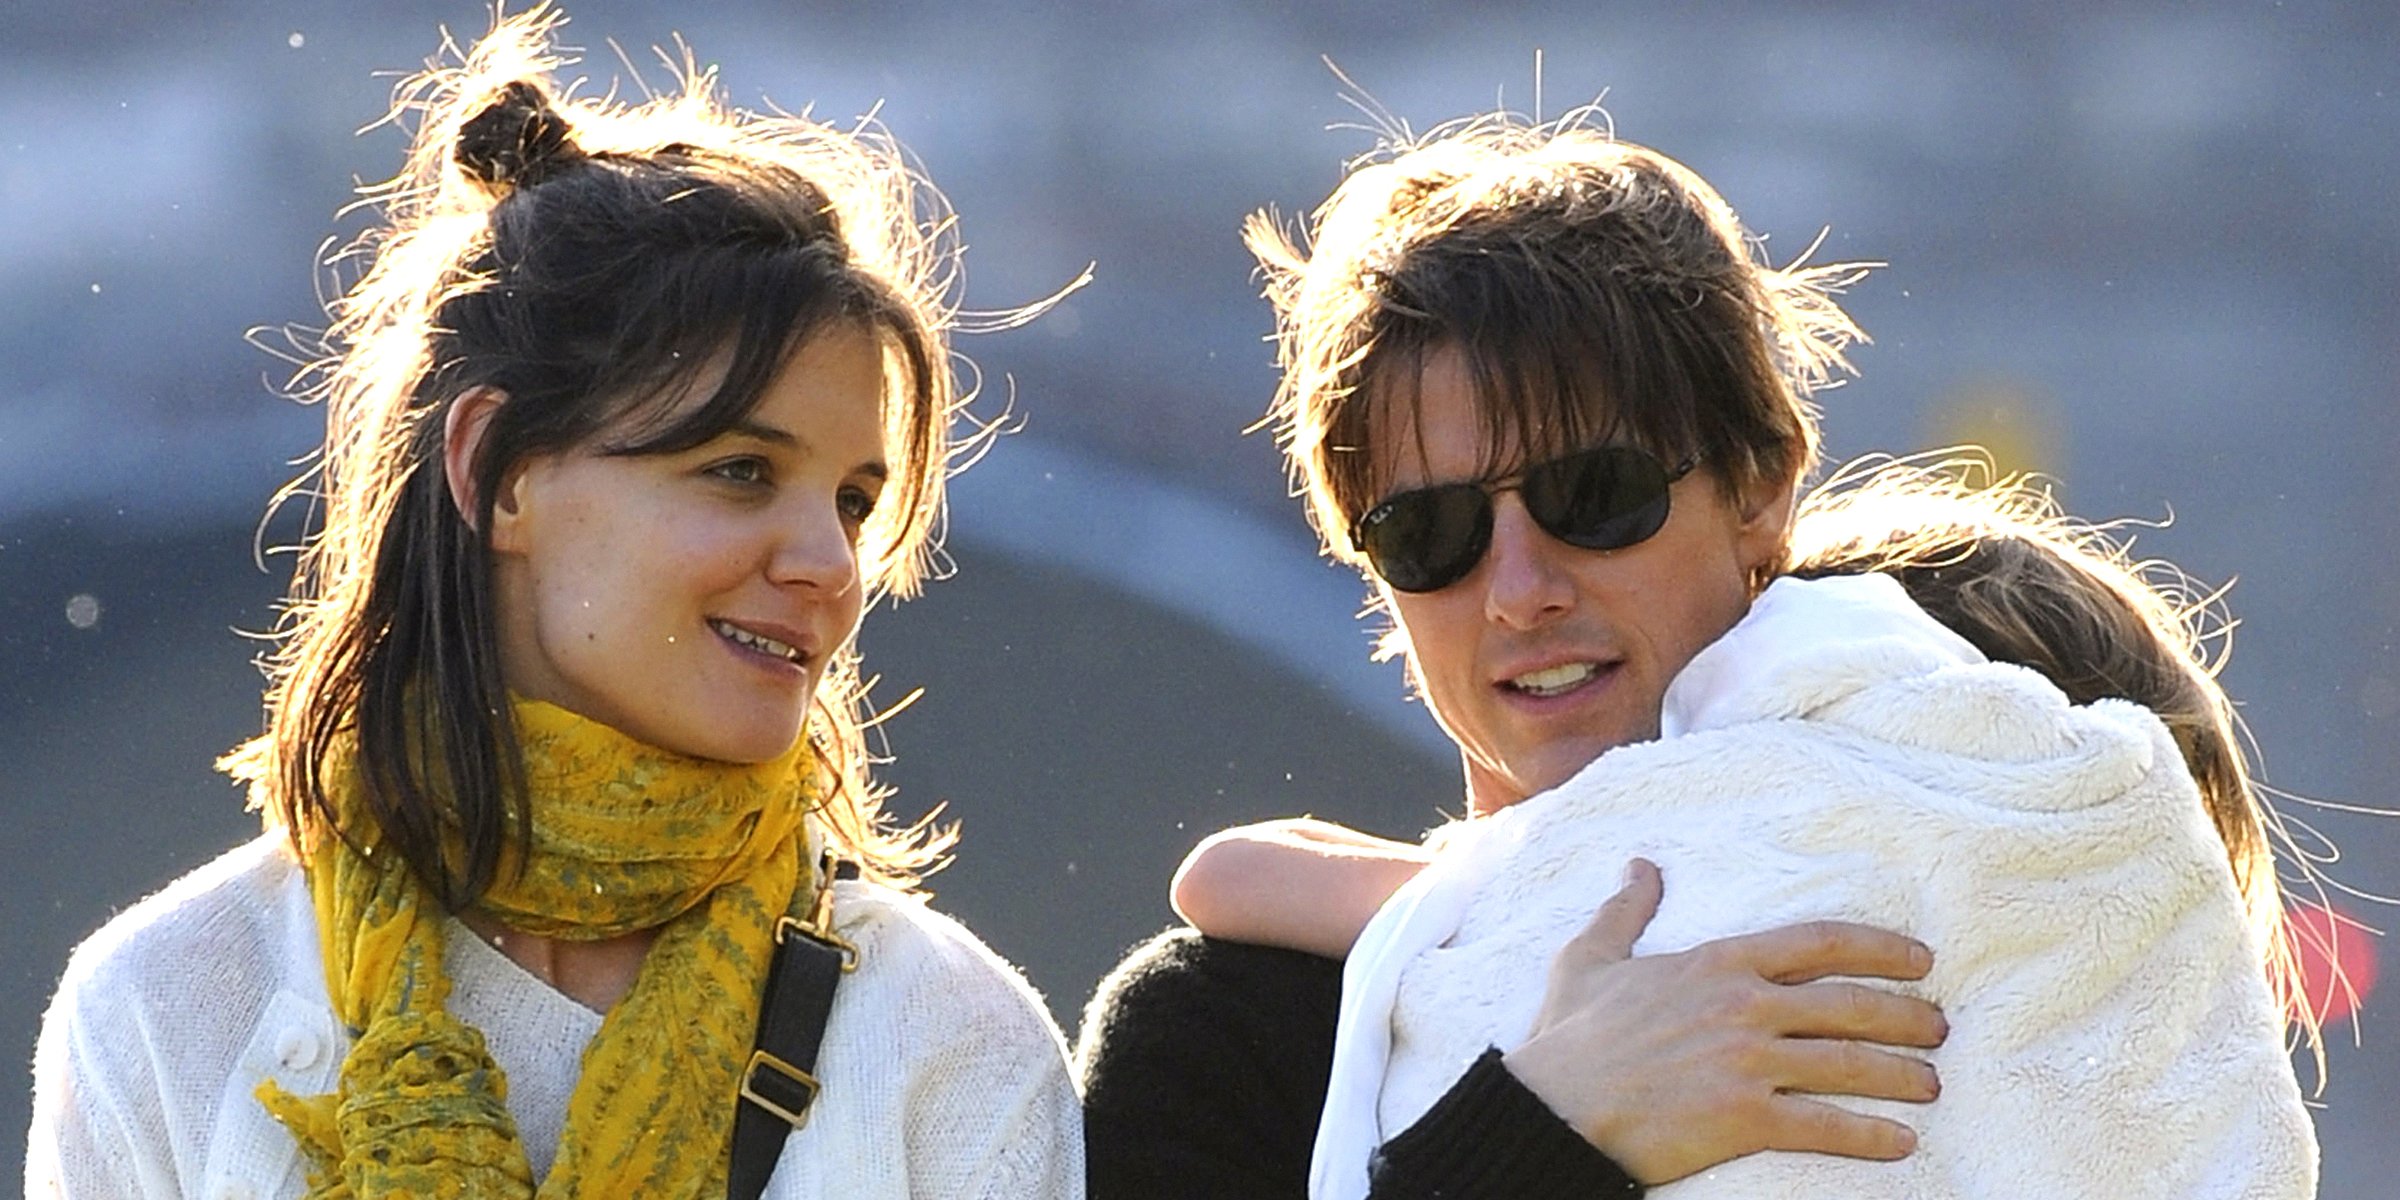 Katie Holmes, Tom Cruise, and Suri Cruise, 2009 | Source: Getty Images